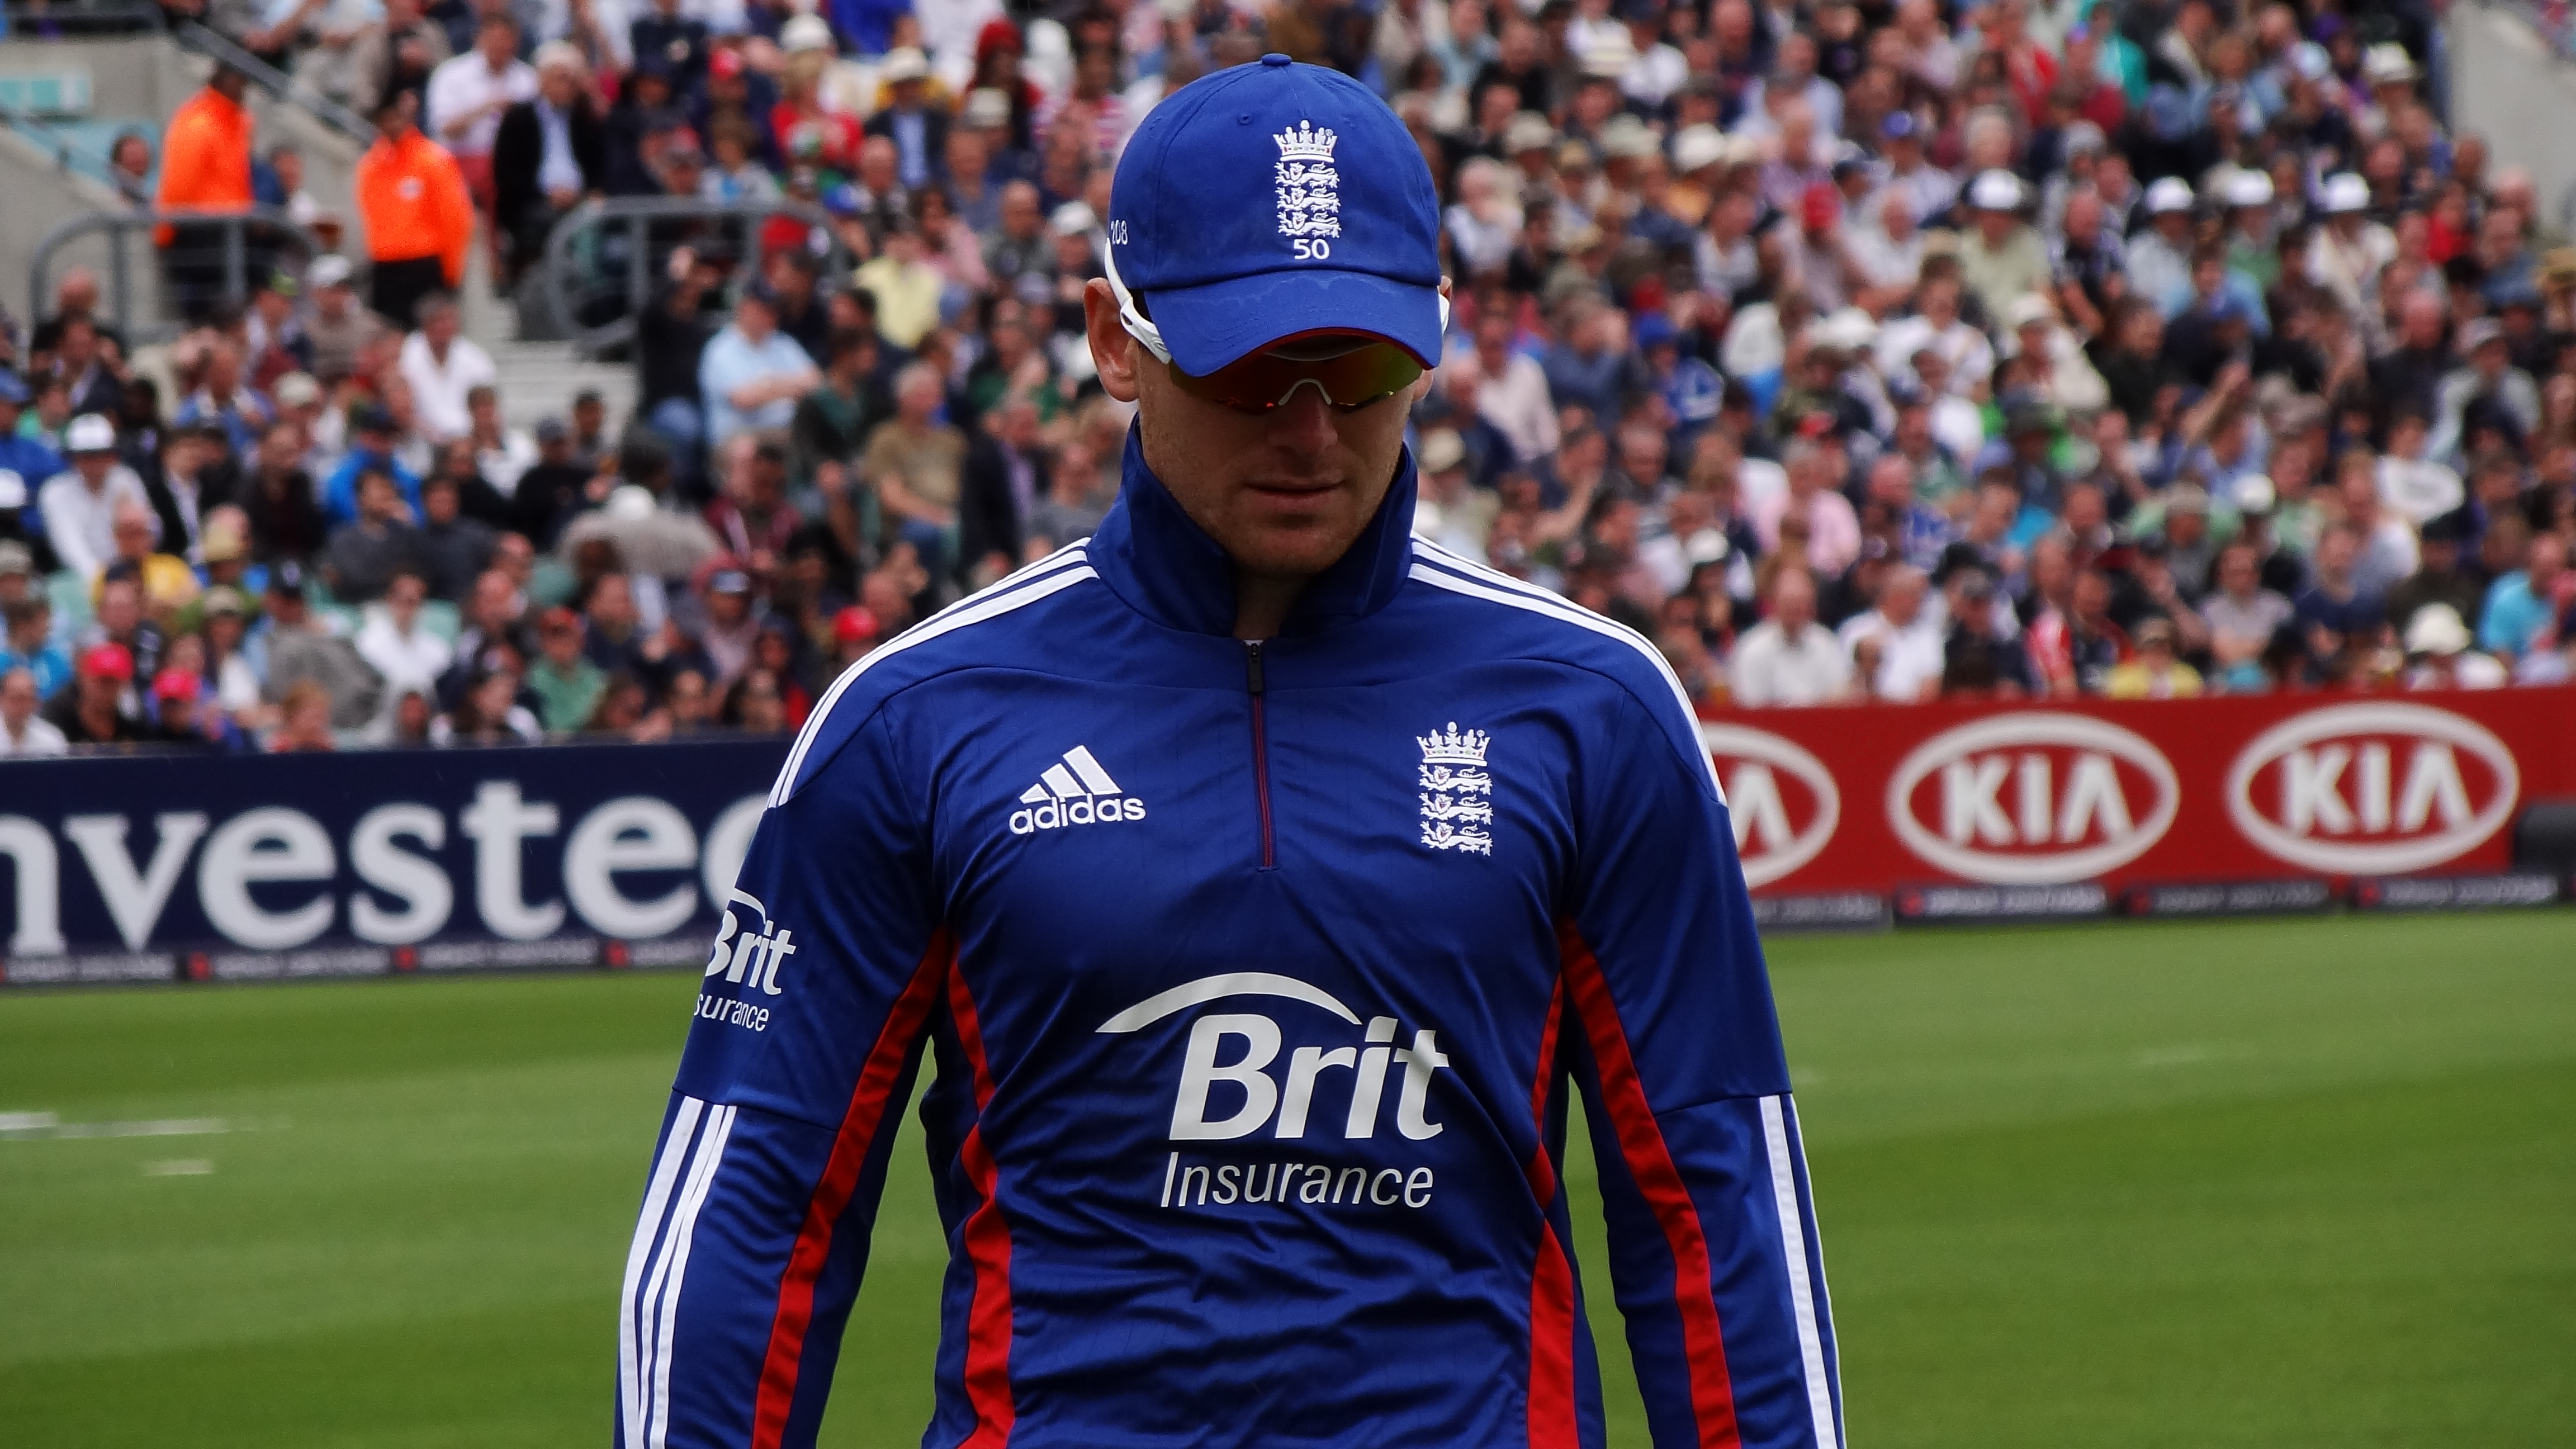 Cricket-England captain Morgan banned for fourth Pakistan ODI over slow over-rate